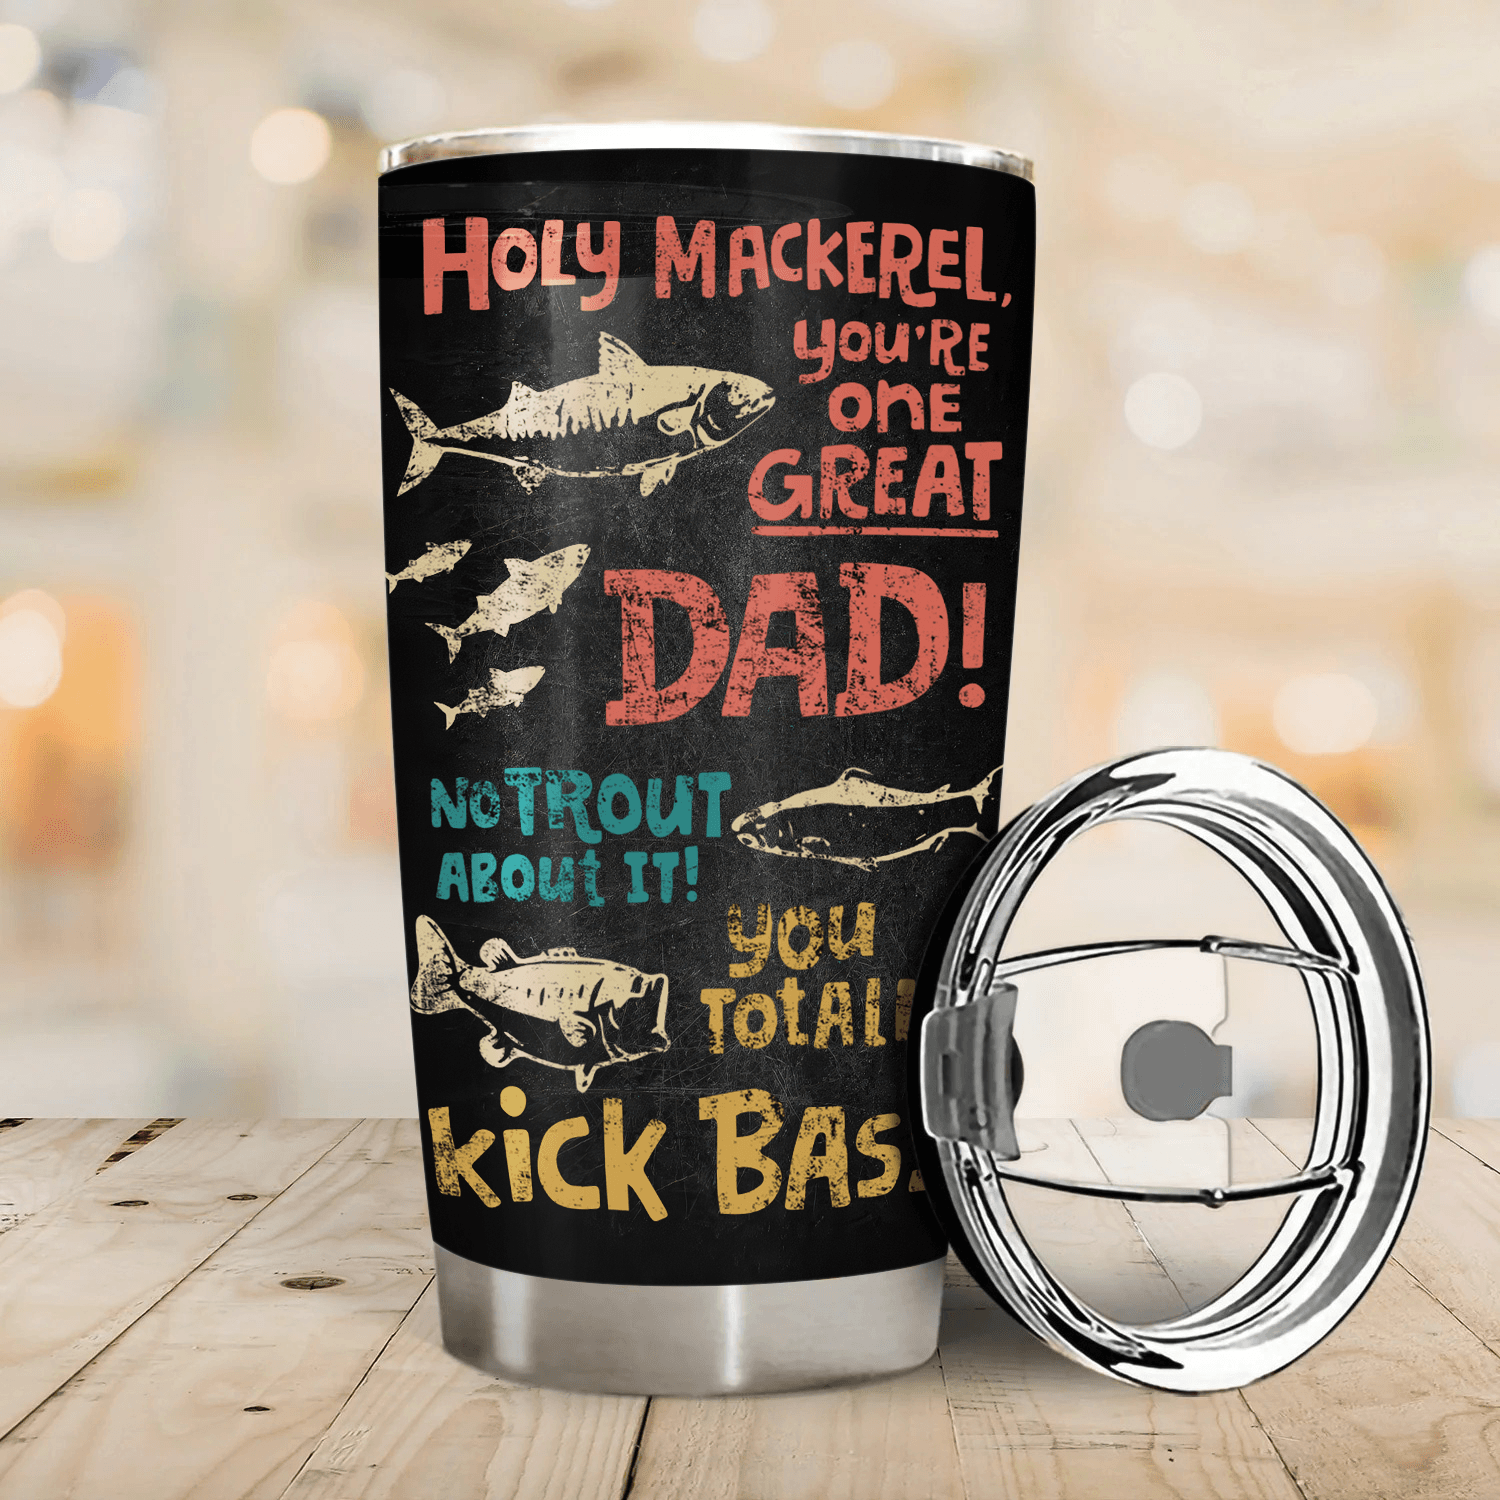 We Hooked The Best Dad Raised Fist Bump - Personalized Custom 20oz Fat Tumbler Cup - Father's Day Funny Gift for Dad, Grandpa, Daddy, Dada, Husband, Fishing, Reel Cool Dad